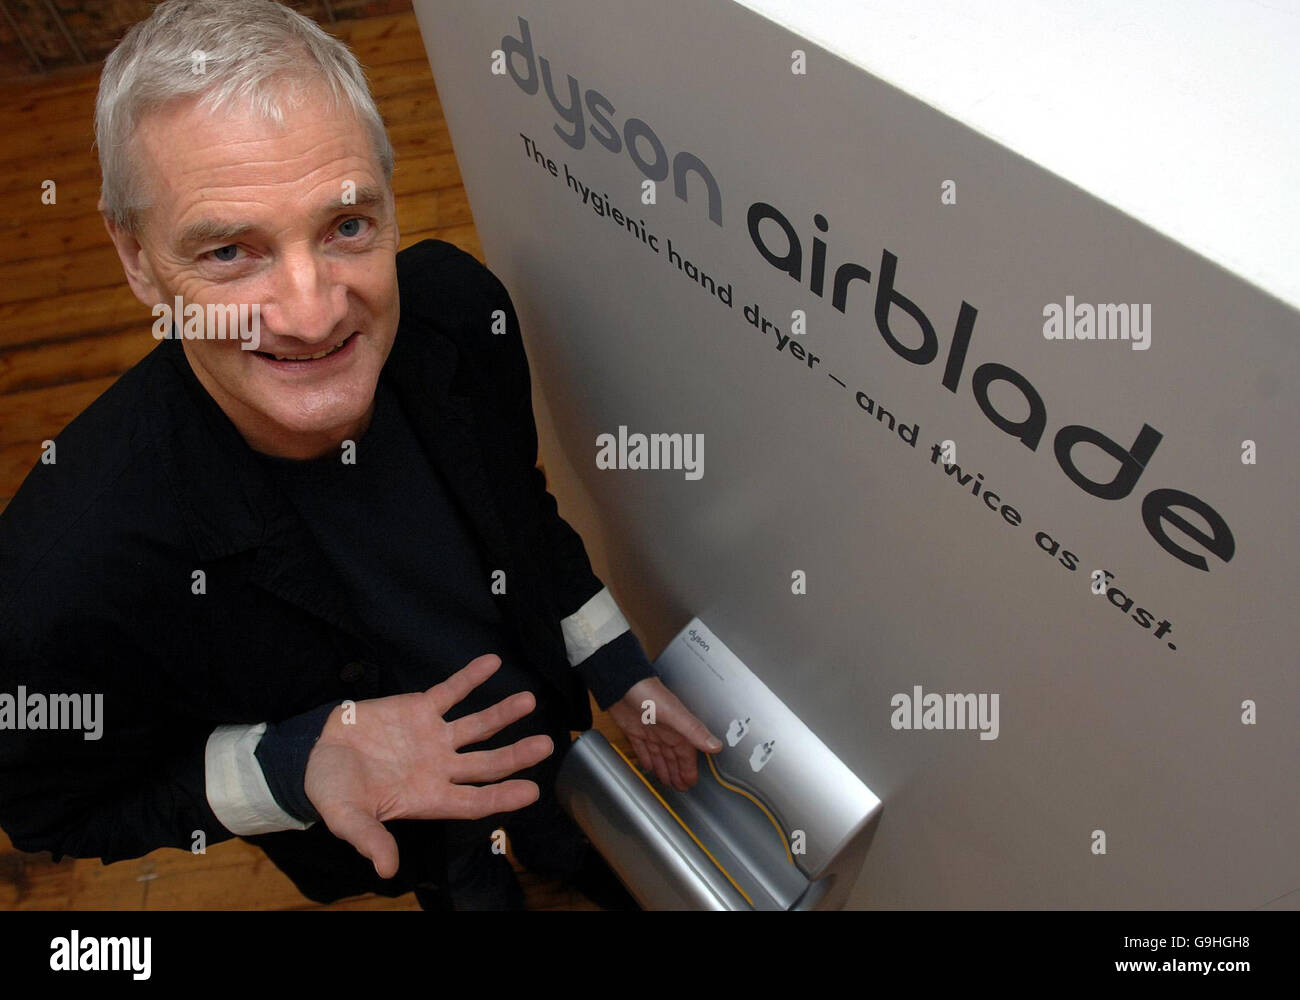 Vacuum cleaner king James Dyson with his new invention the Airblade, a high-speed hand dryer for public toilets, during an unveiling in London. Stock Photo